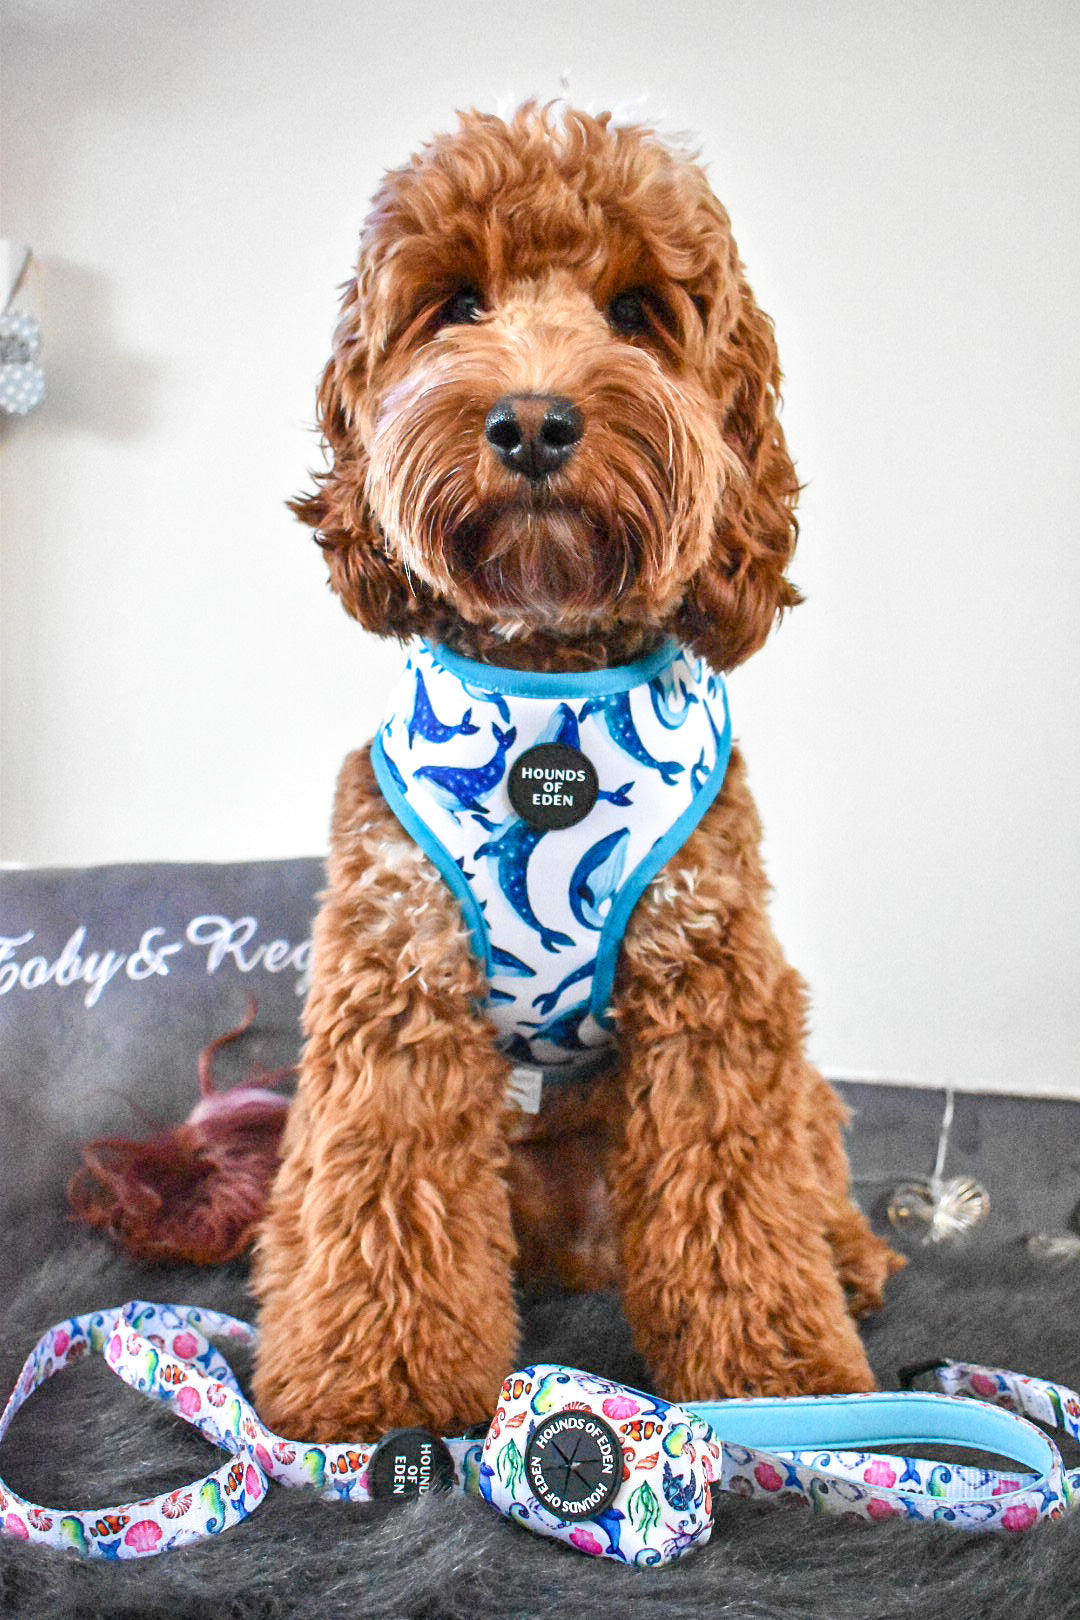 'Whale of a Time' - Sea Themed Reversible Dog Harness